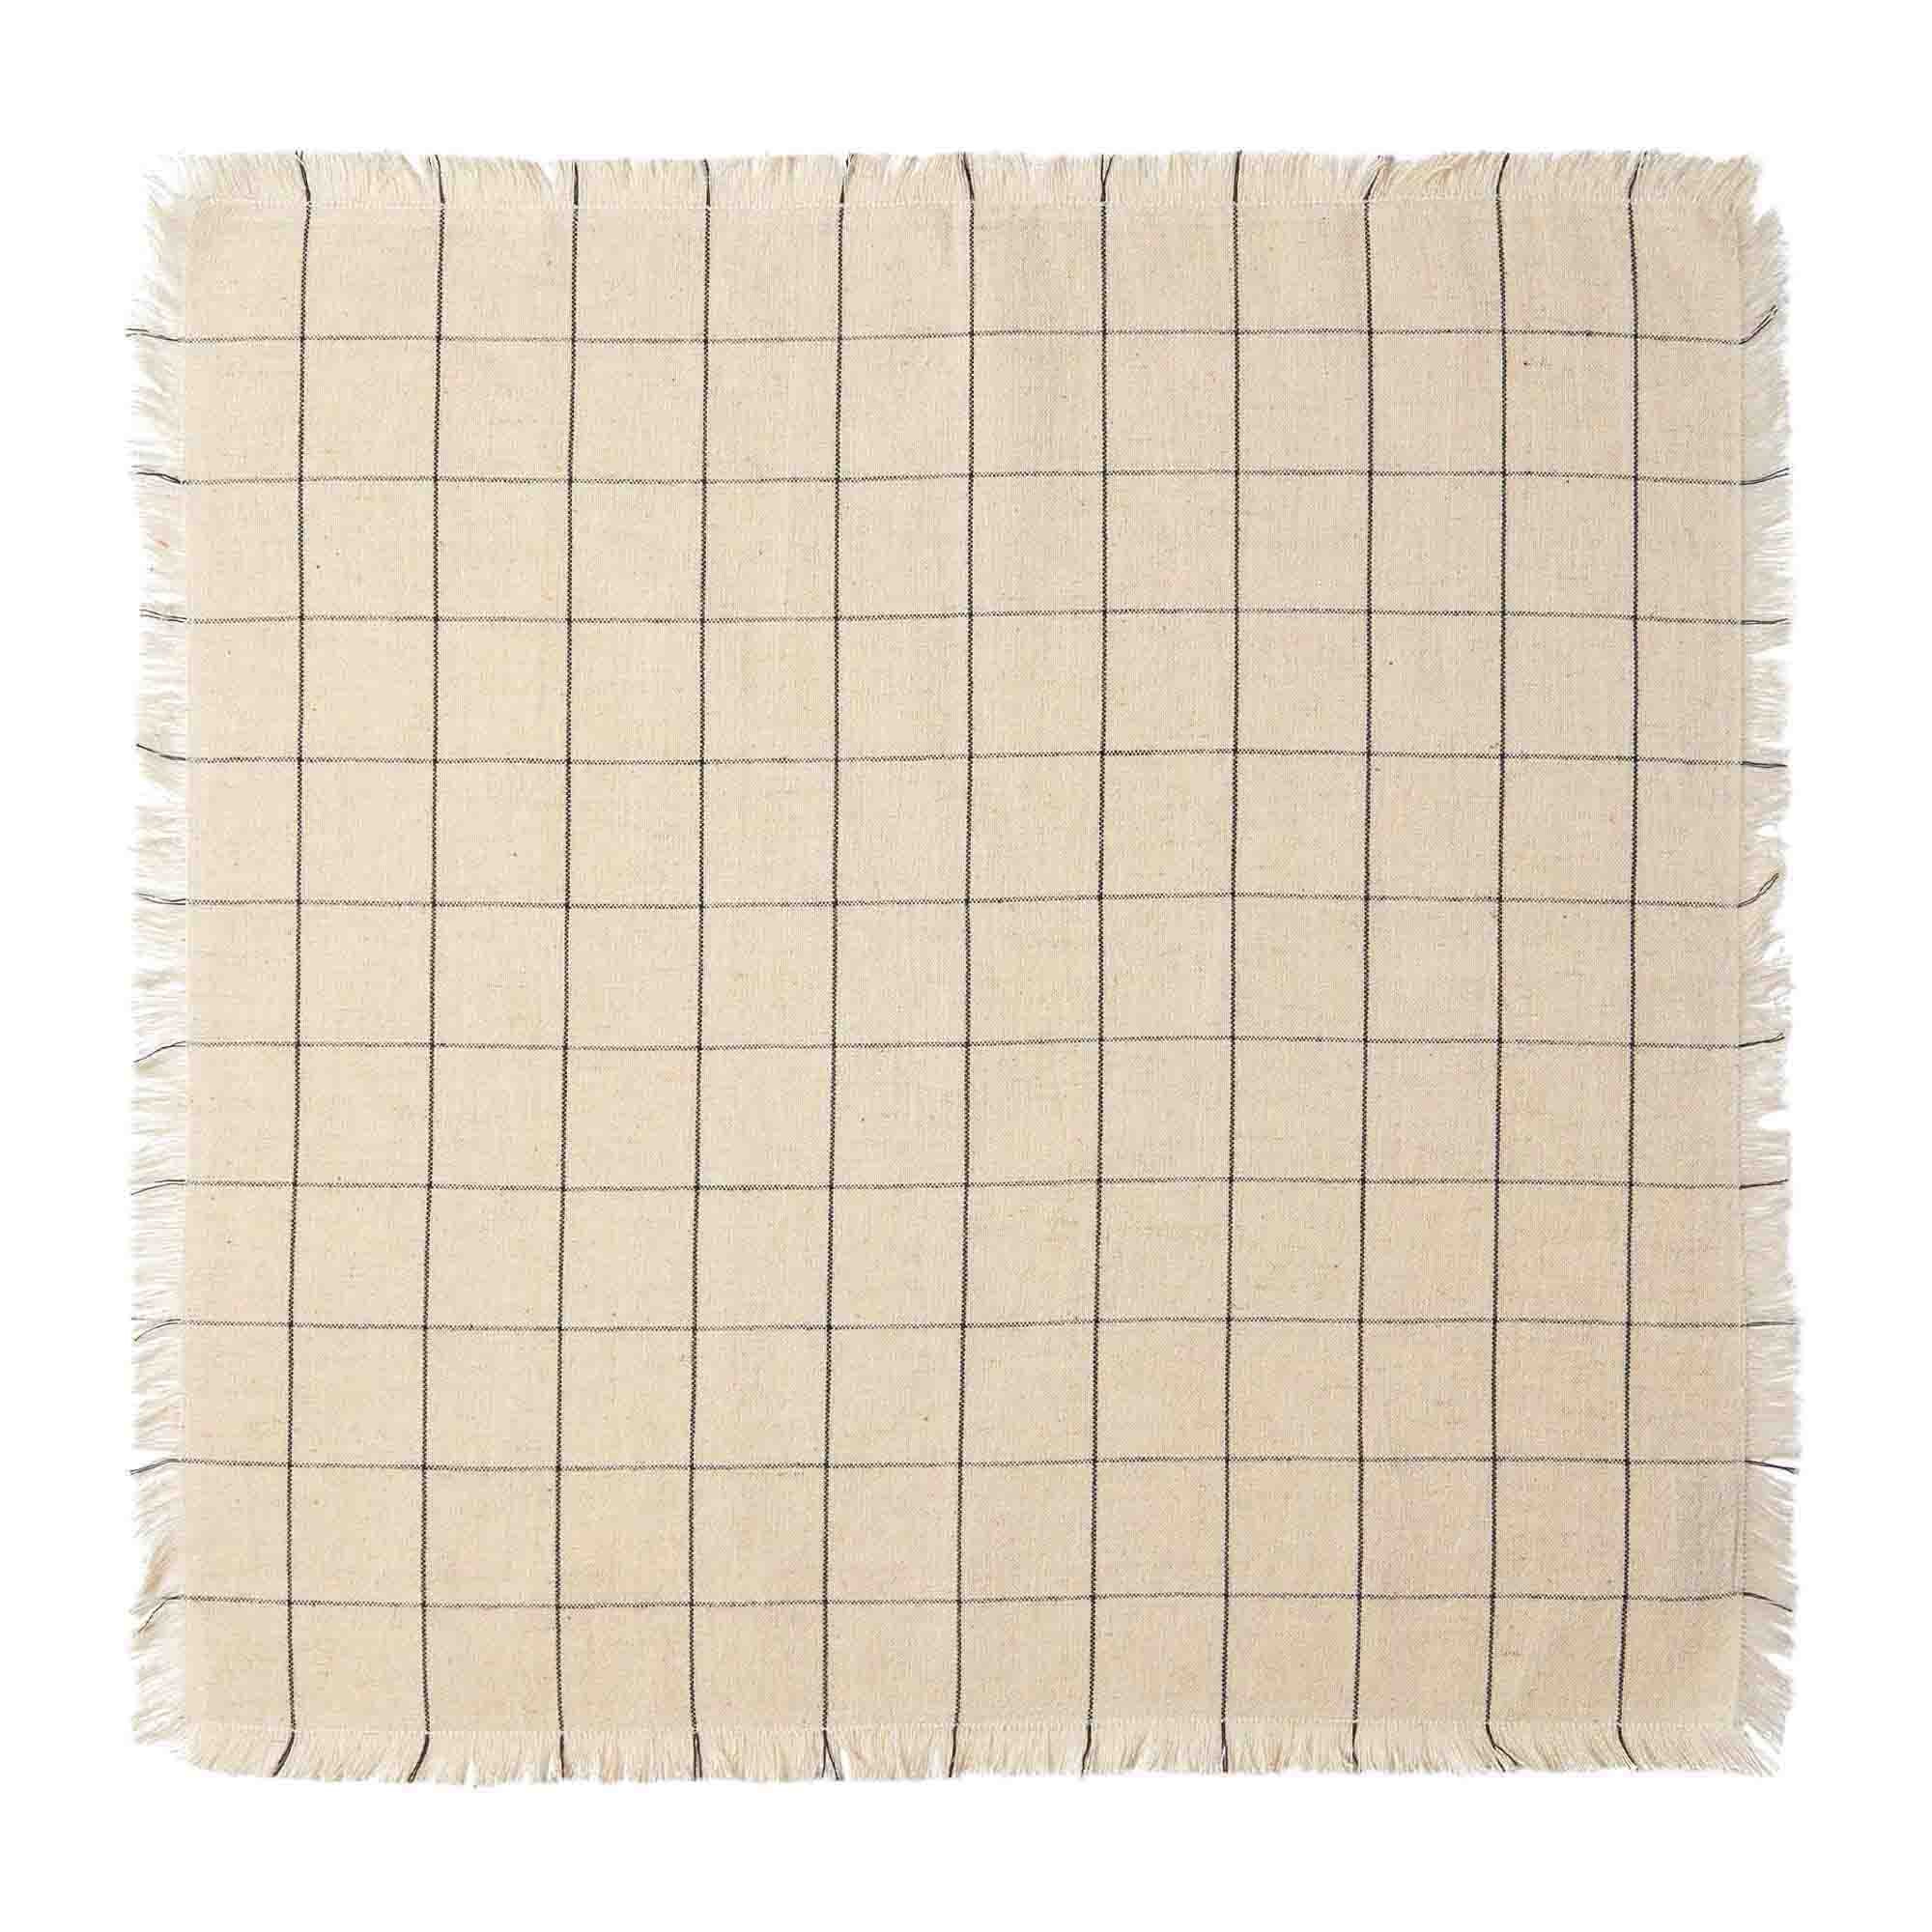 Woven%20Check%20Napkin%20in%20Oyster image 1